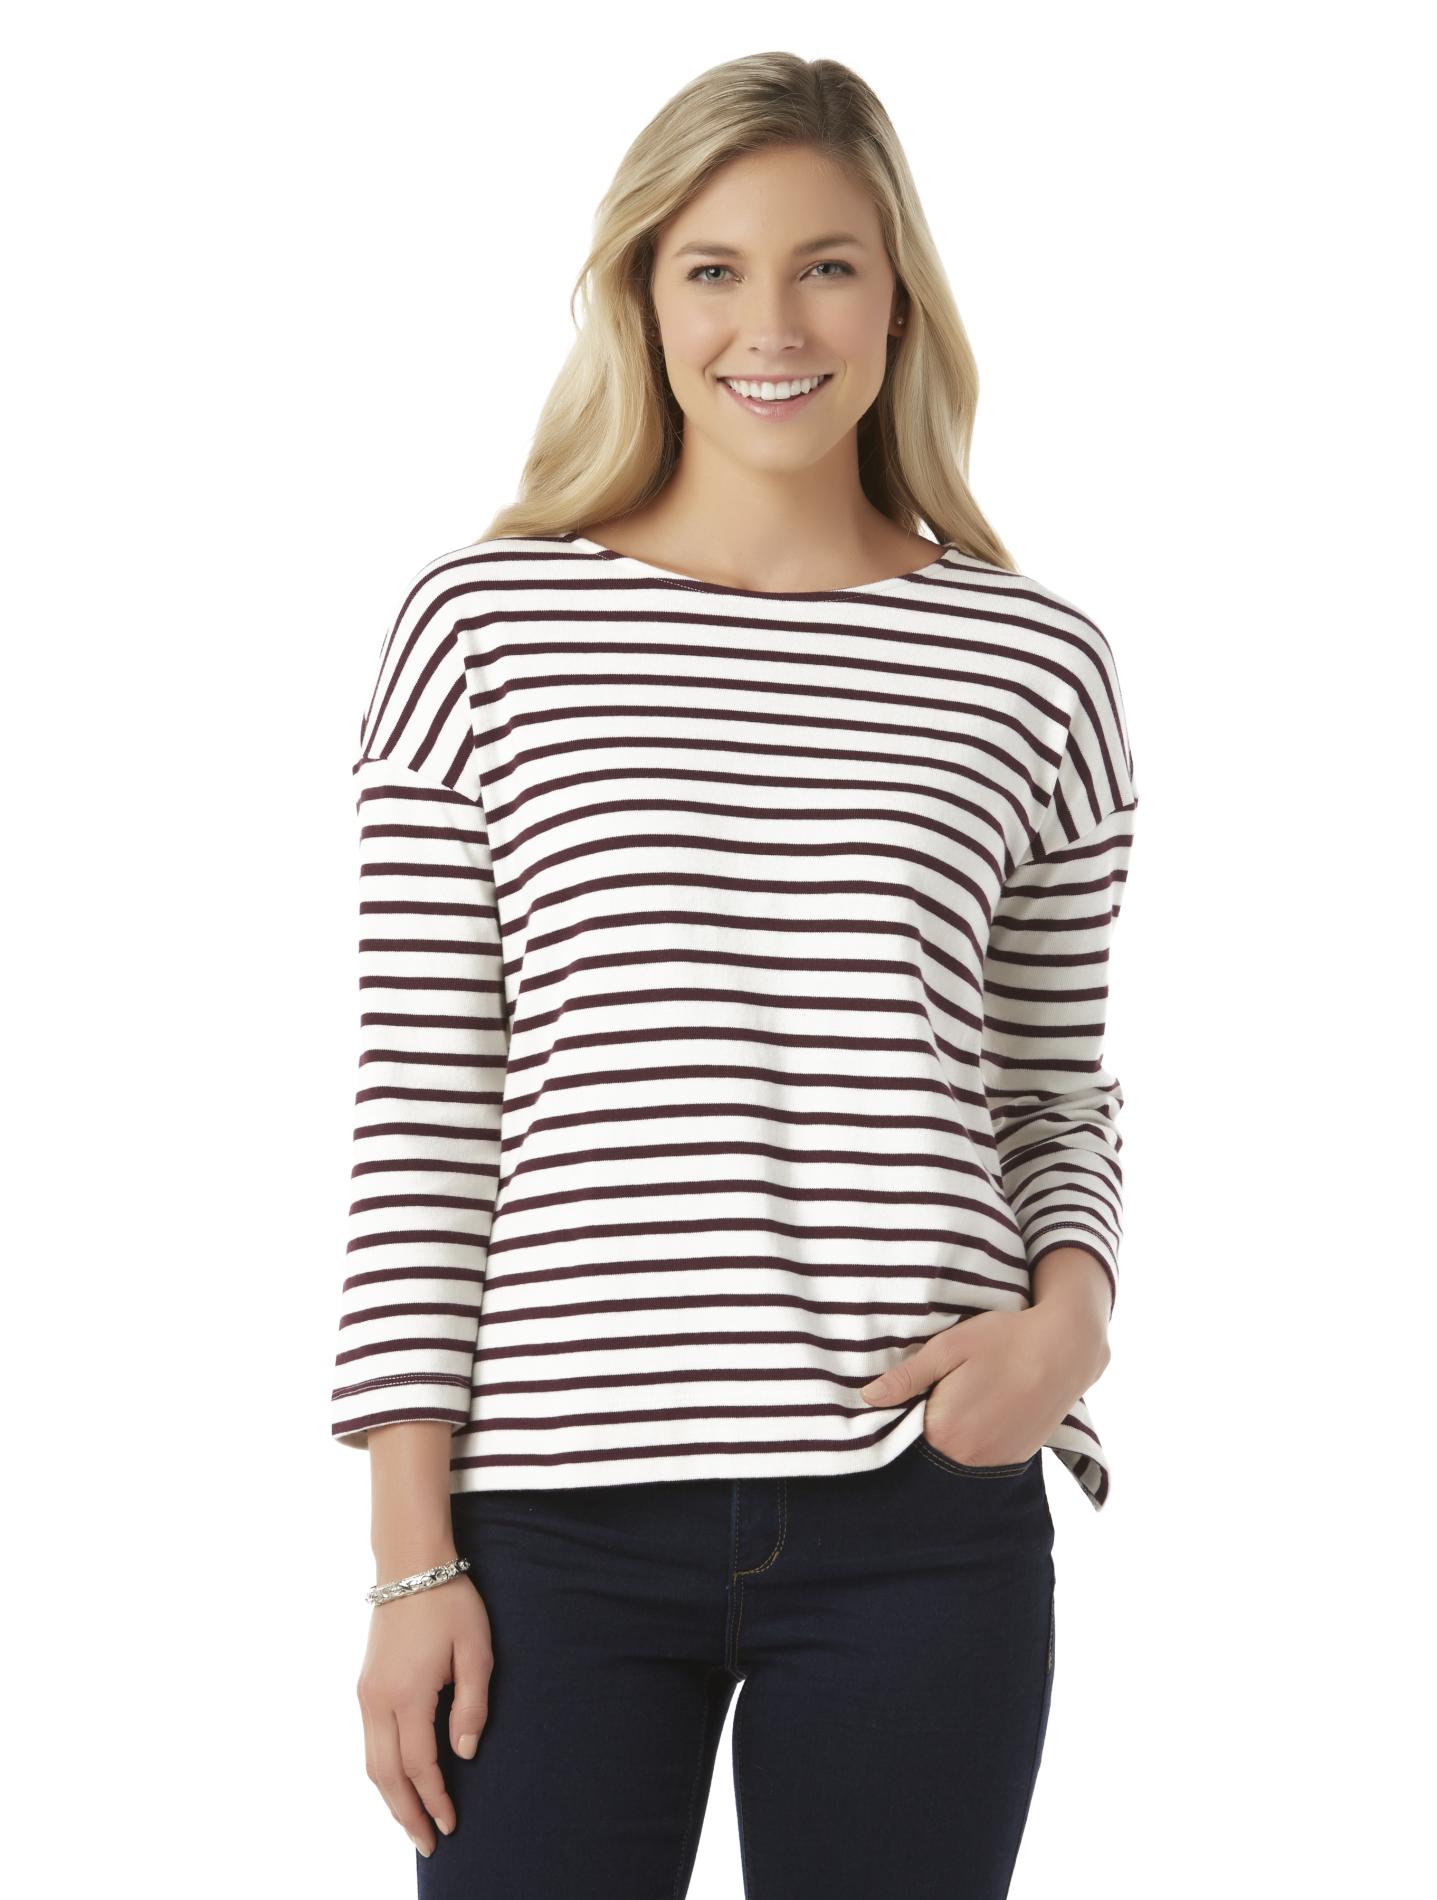 Simply Styled Women's Long-Sleeve Shirt - Striped